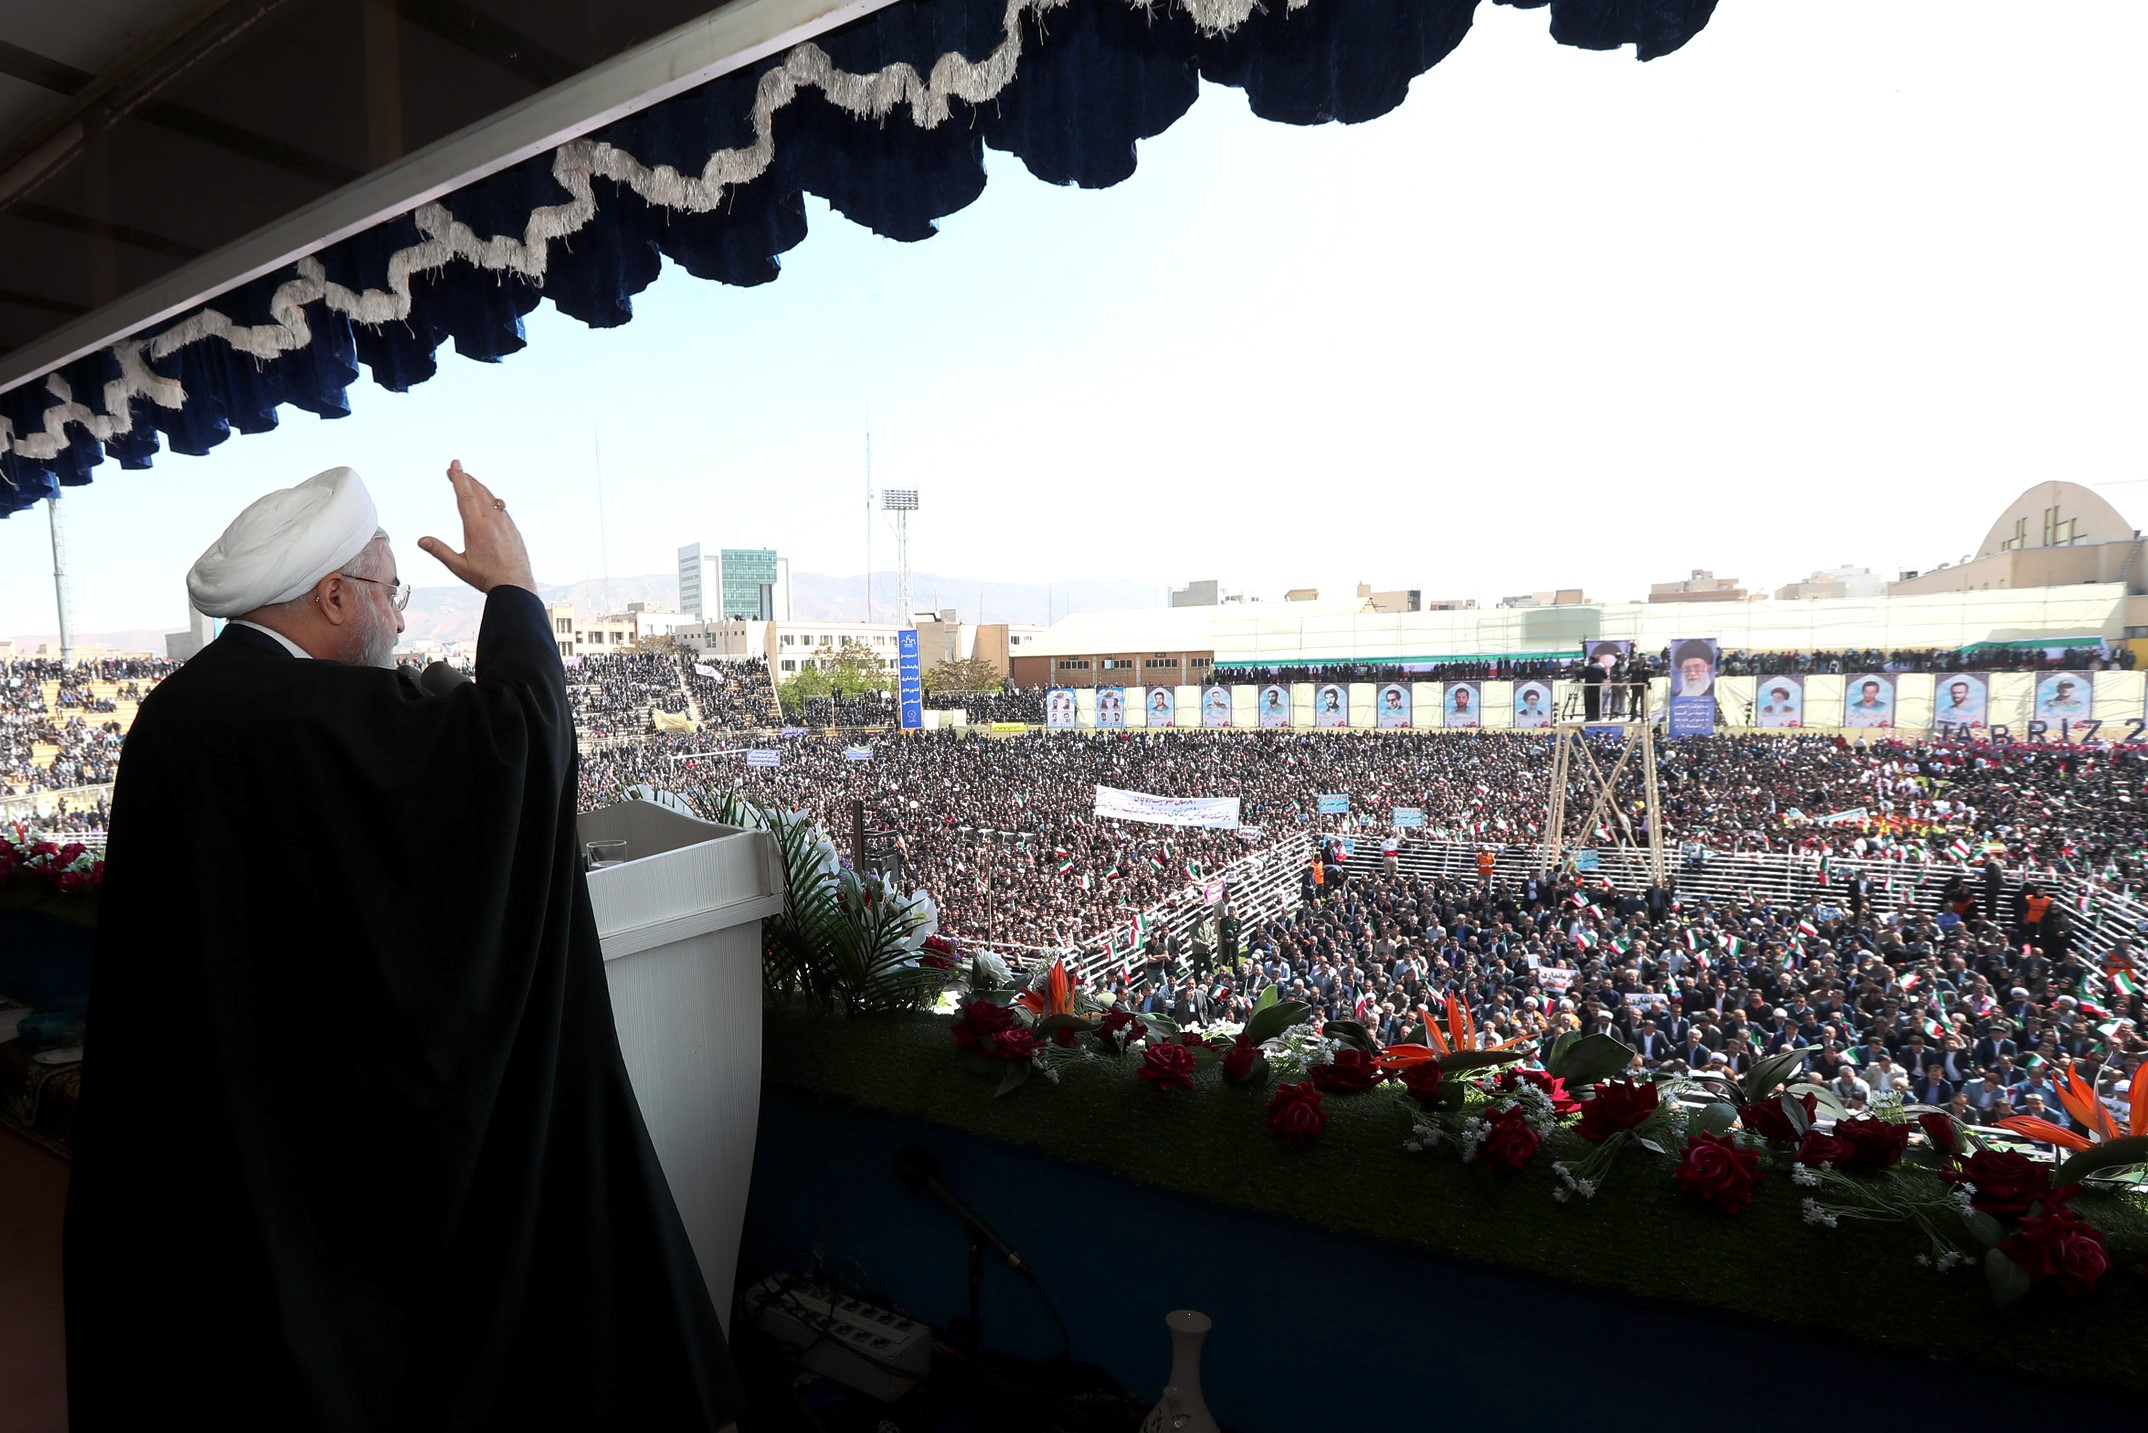 PHOTO: Iranian president Hassan Rouhani addresses the crowd during a rally in Tabriz, Iran on April 24, 2018.